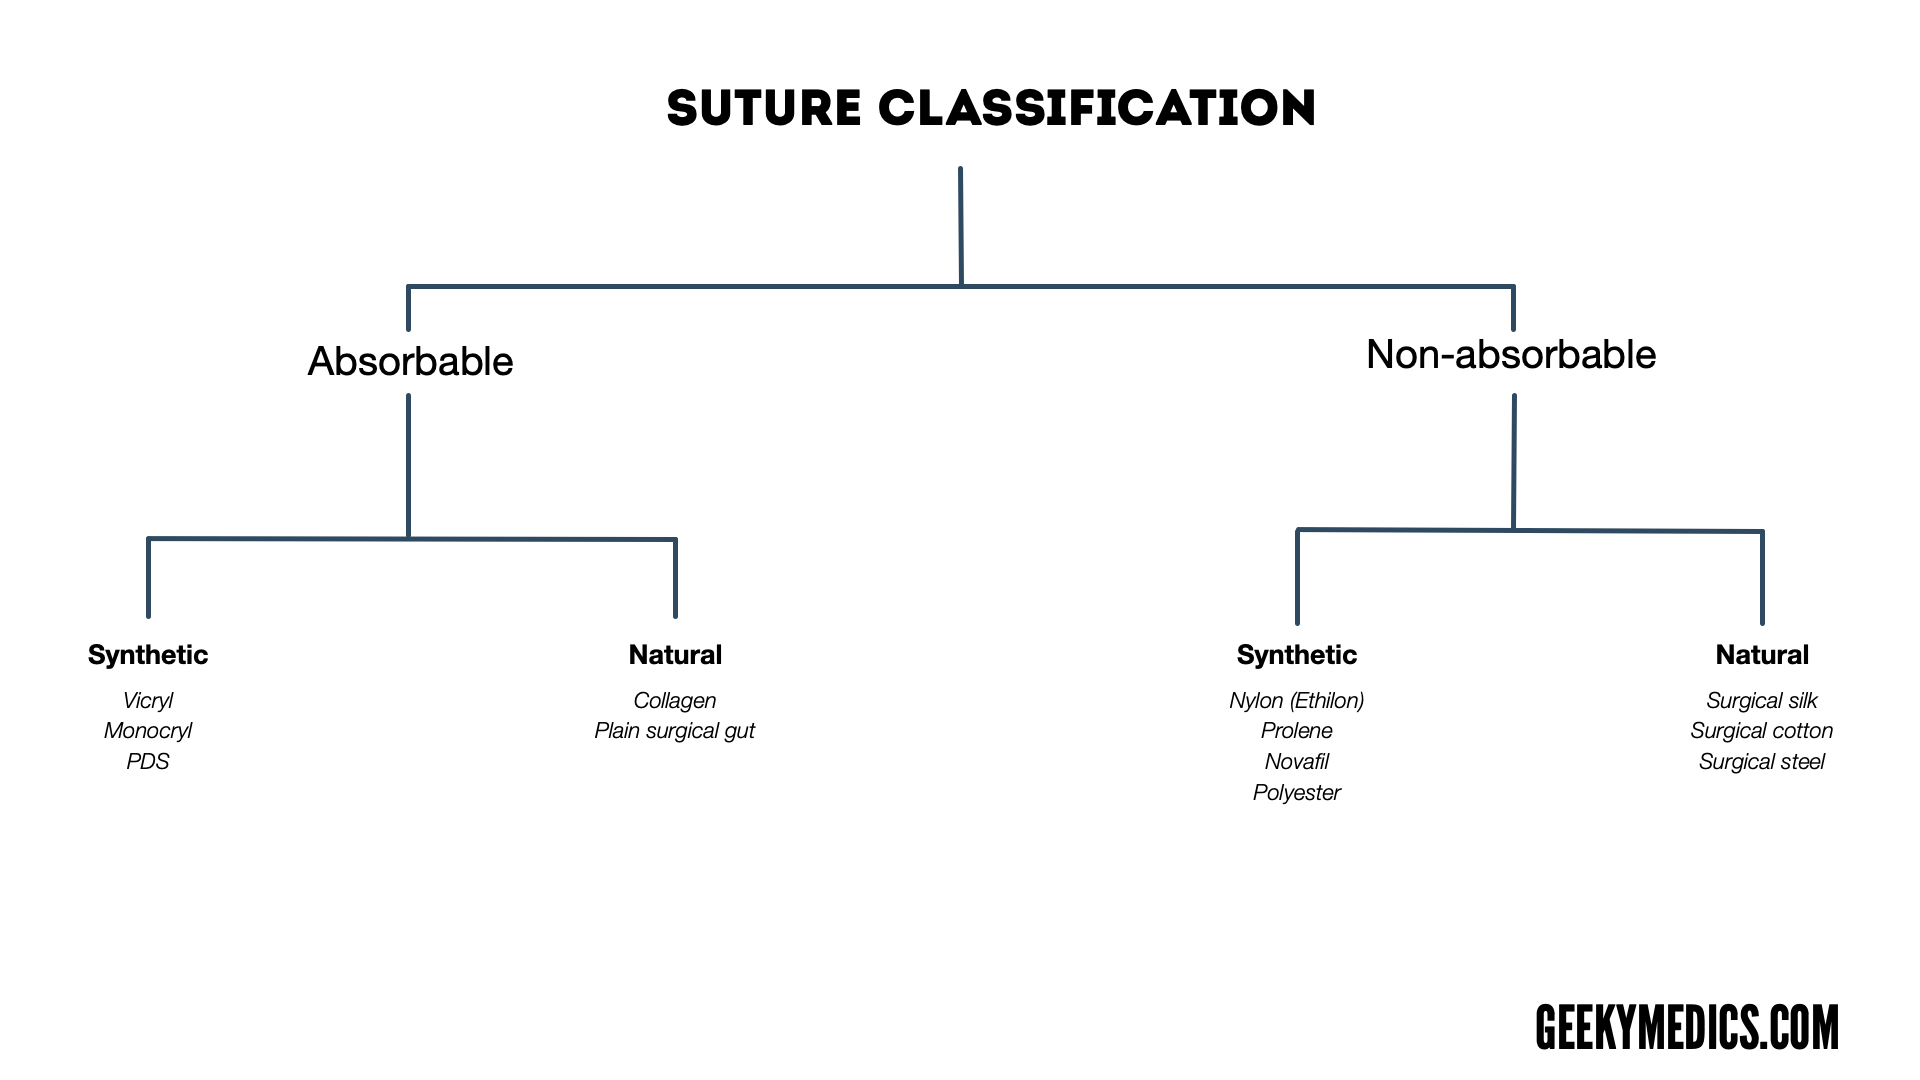 Different Suture Types